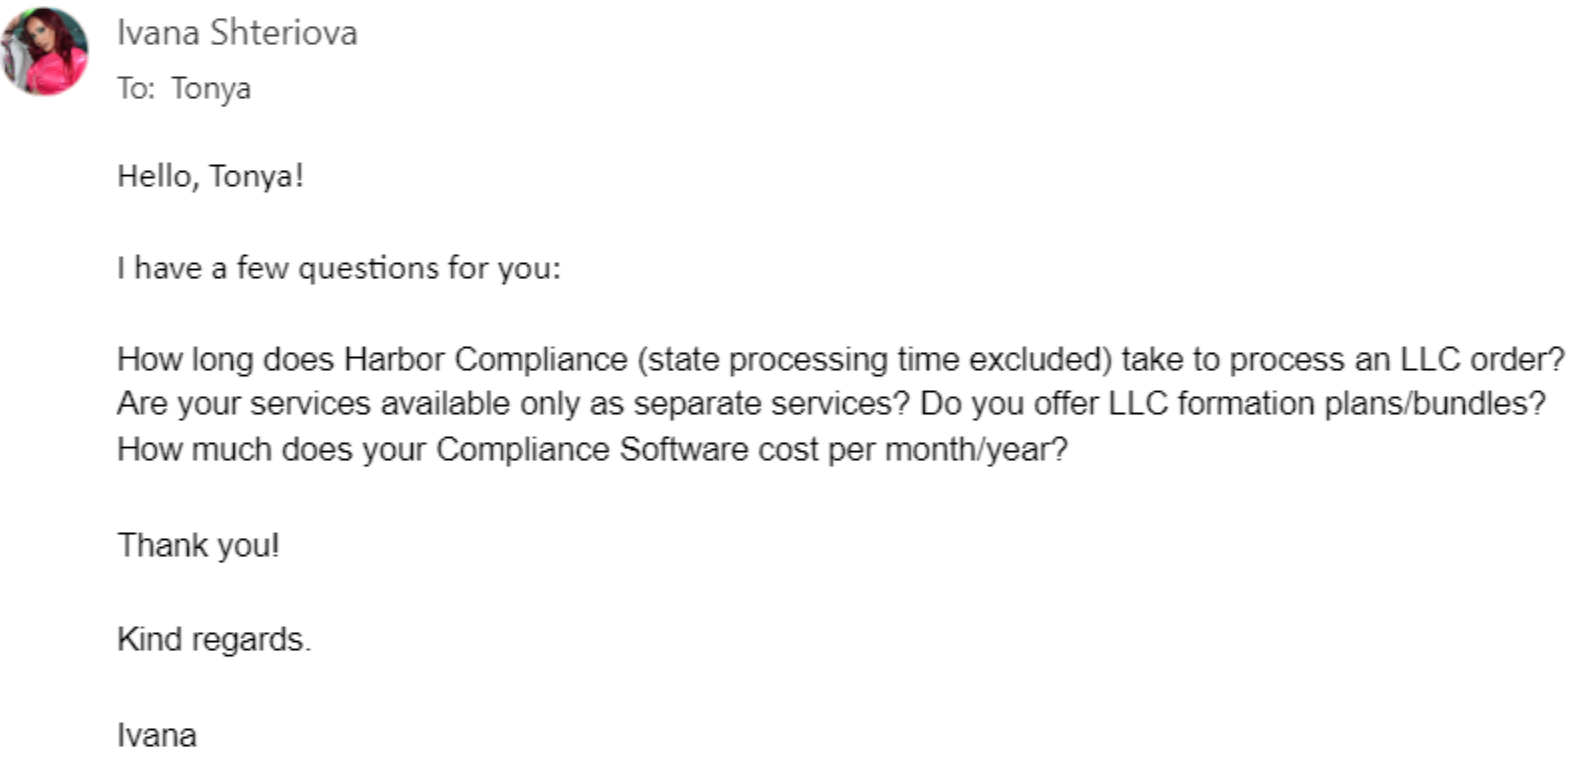 Email with questions about Harbor Compliance's services and prices